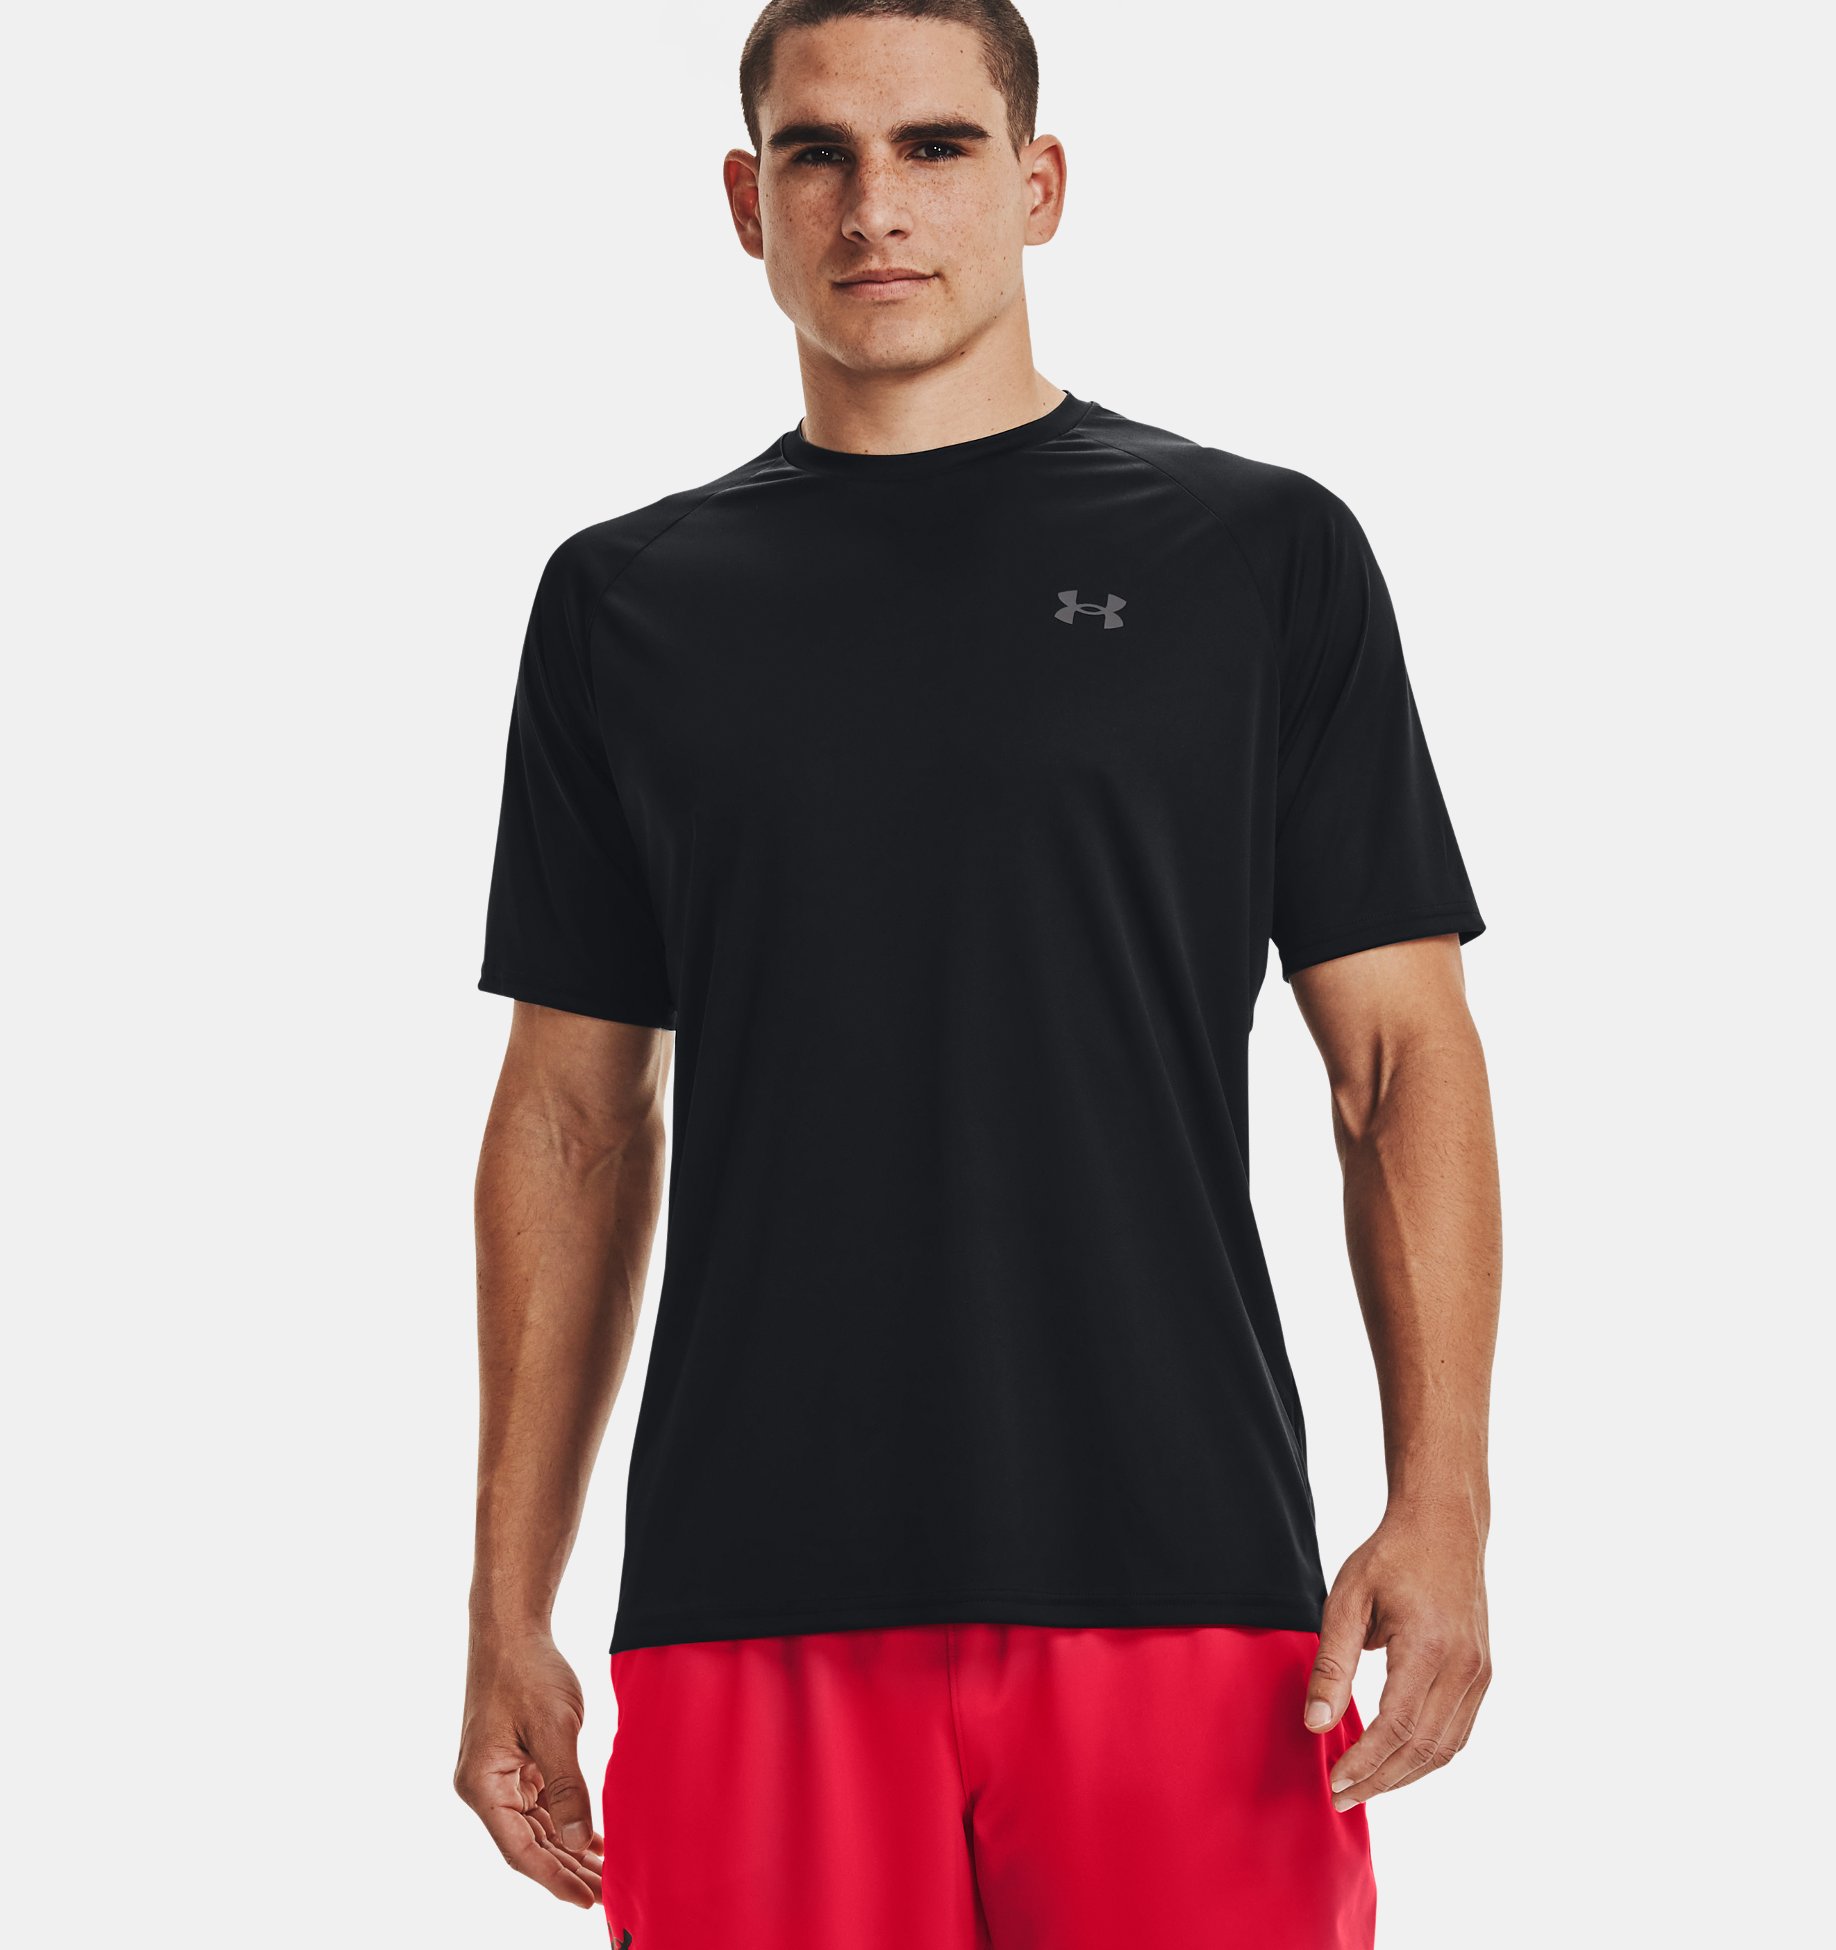 Under Armour Outlet Sale: Up to 50% off Outlet Styles + extra 25% off